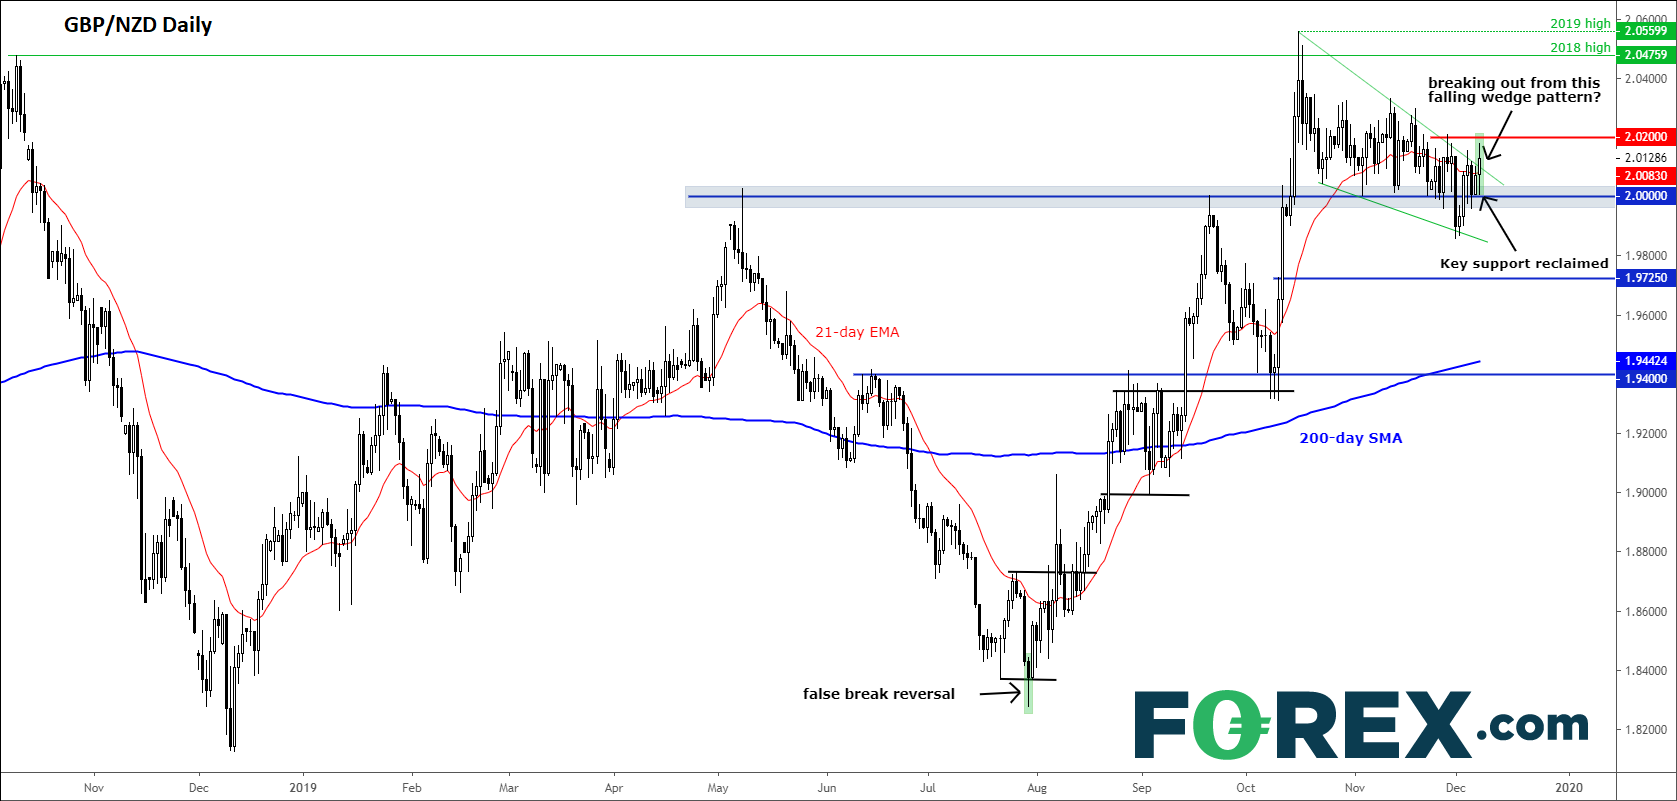 Market chart tracking the GBP against the NZD. Published in Dec 2019 by FOREX.com